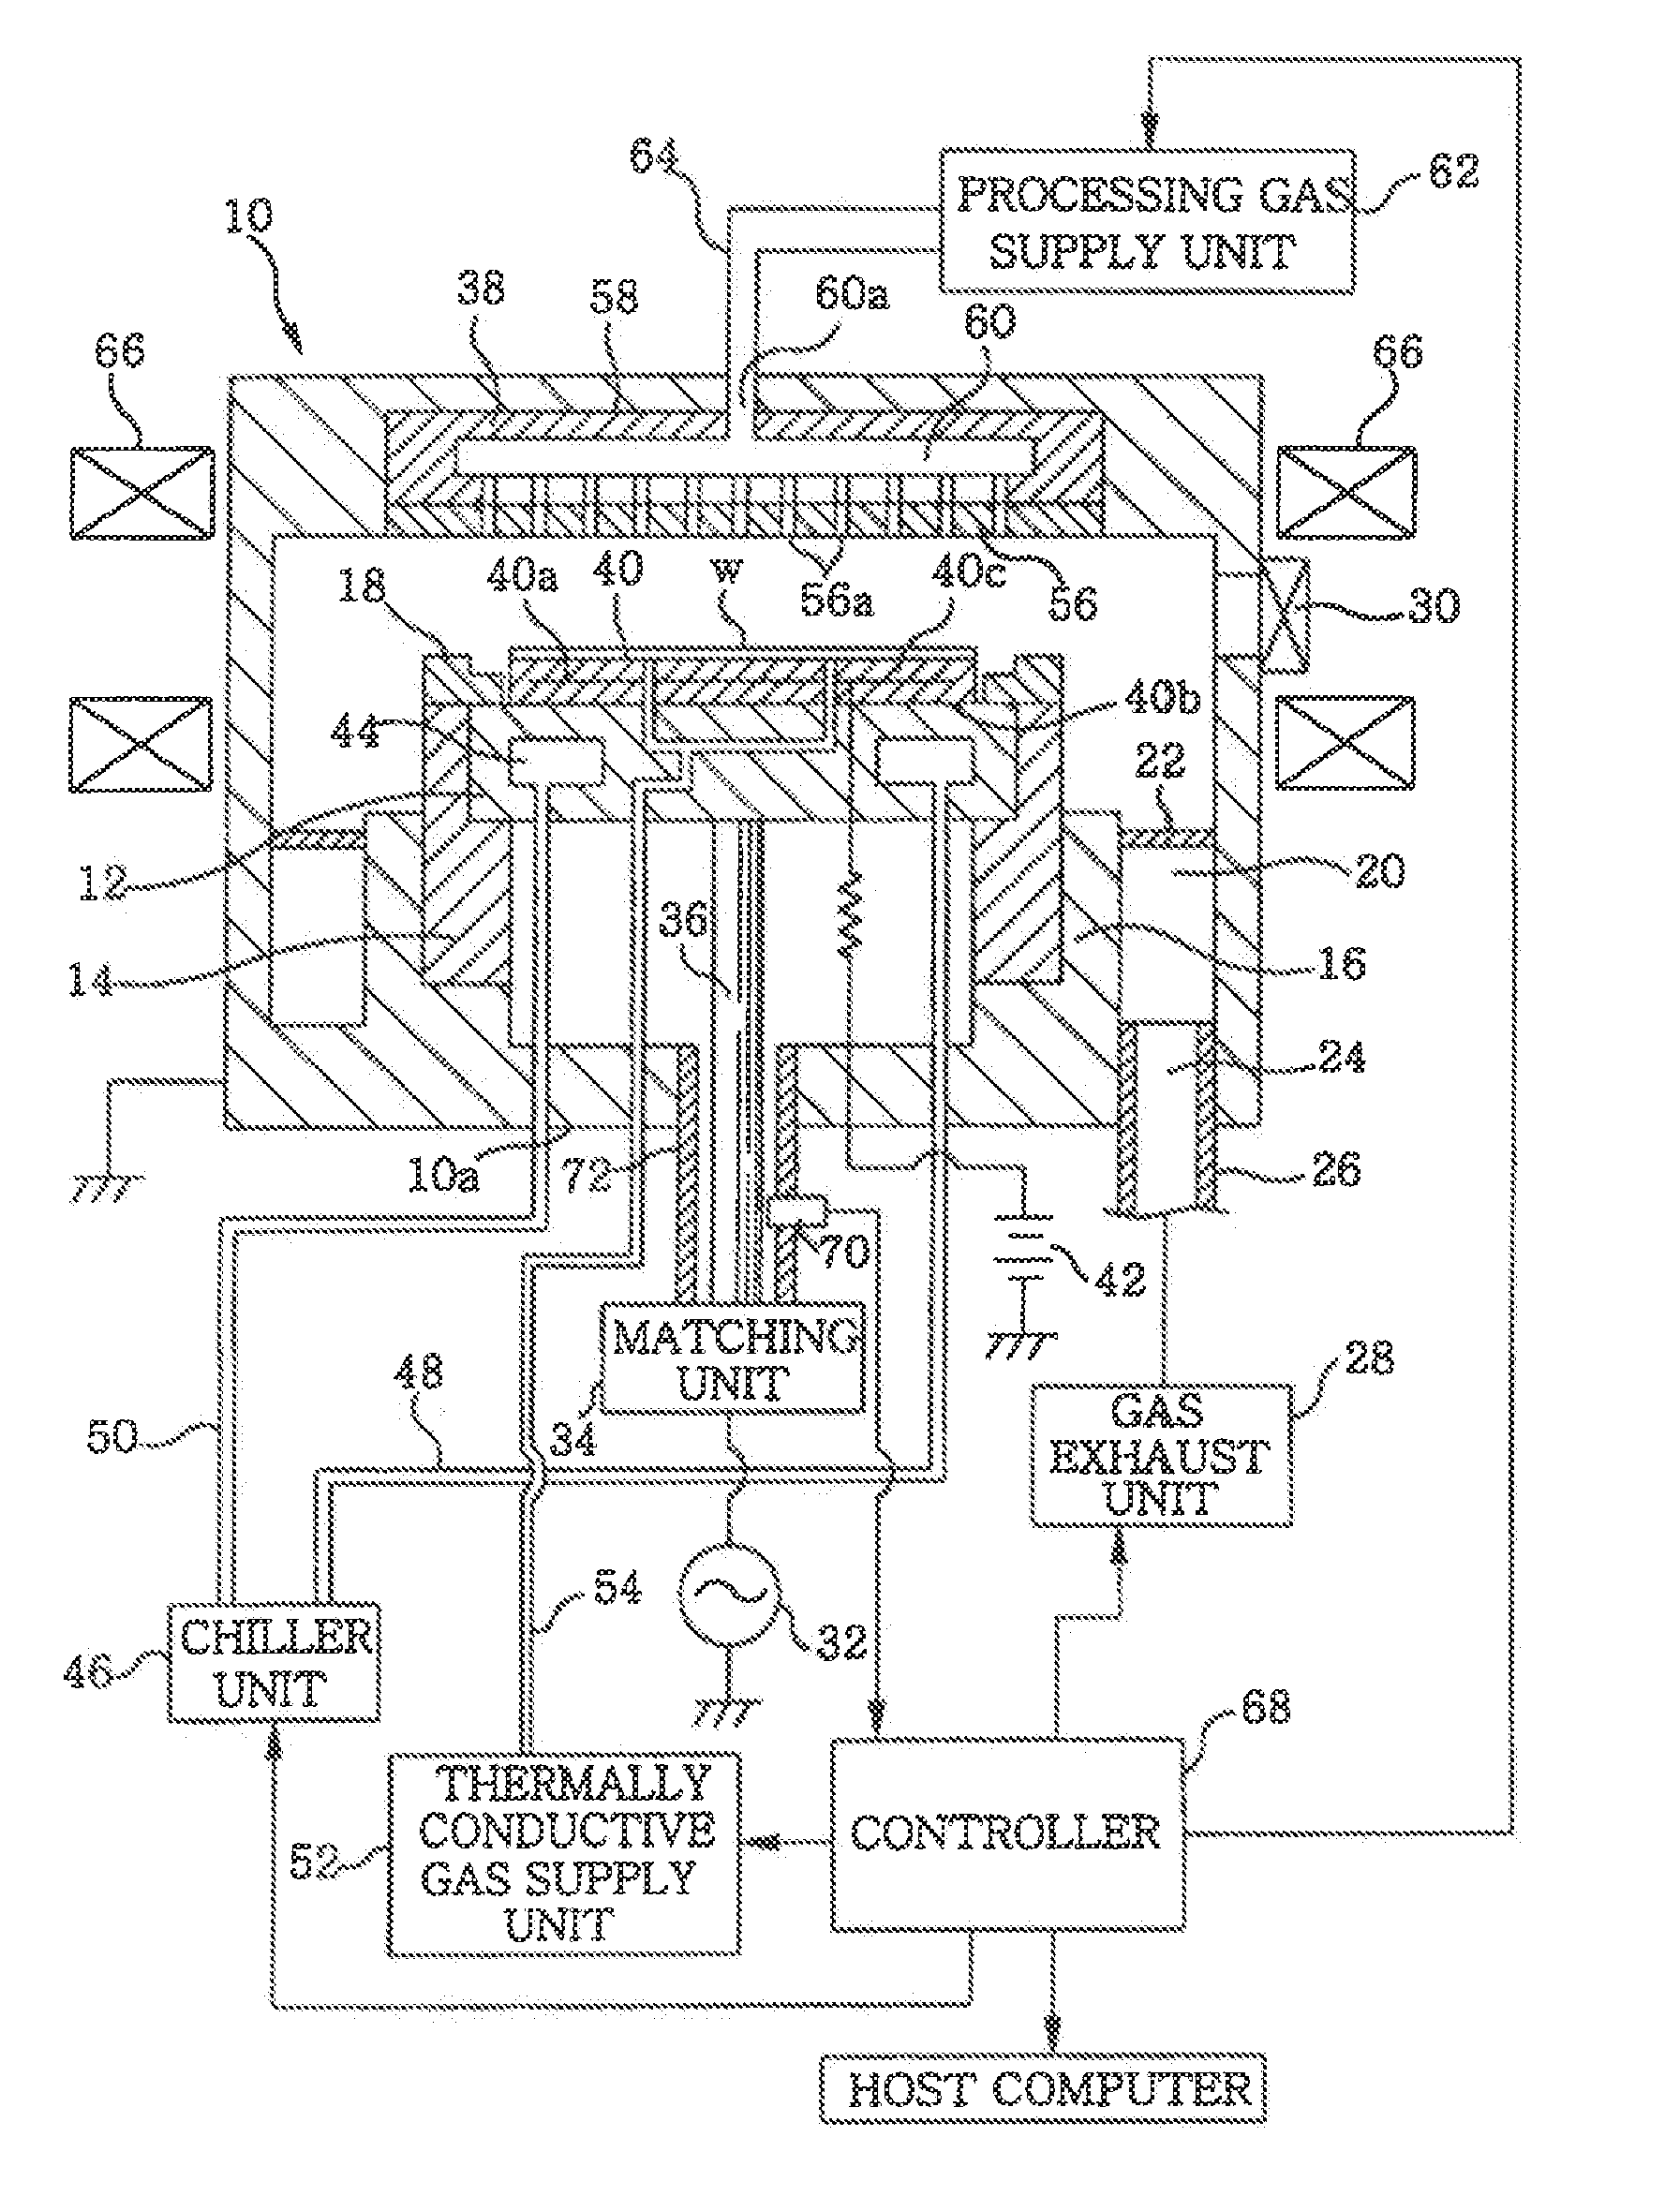 Plasma processing appratus and method and apparatus for measuring DC potential